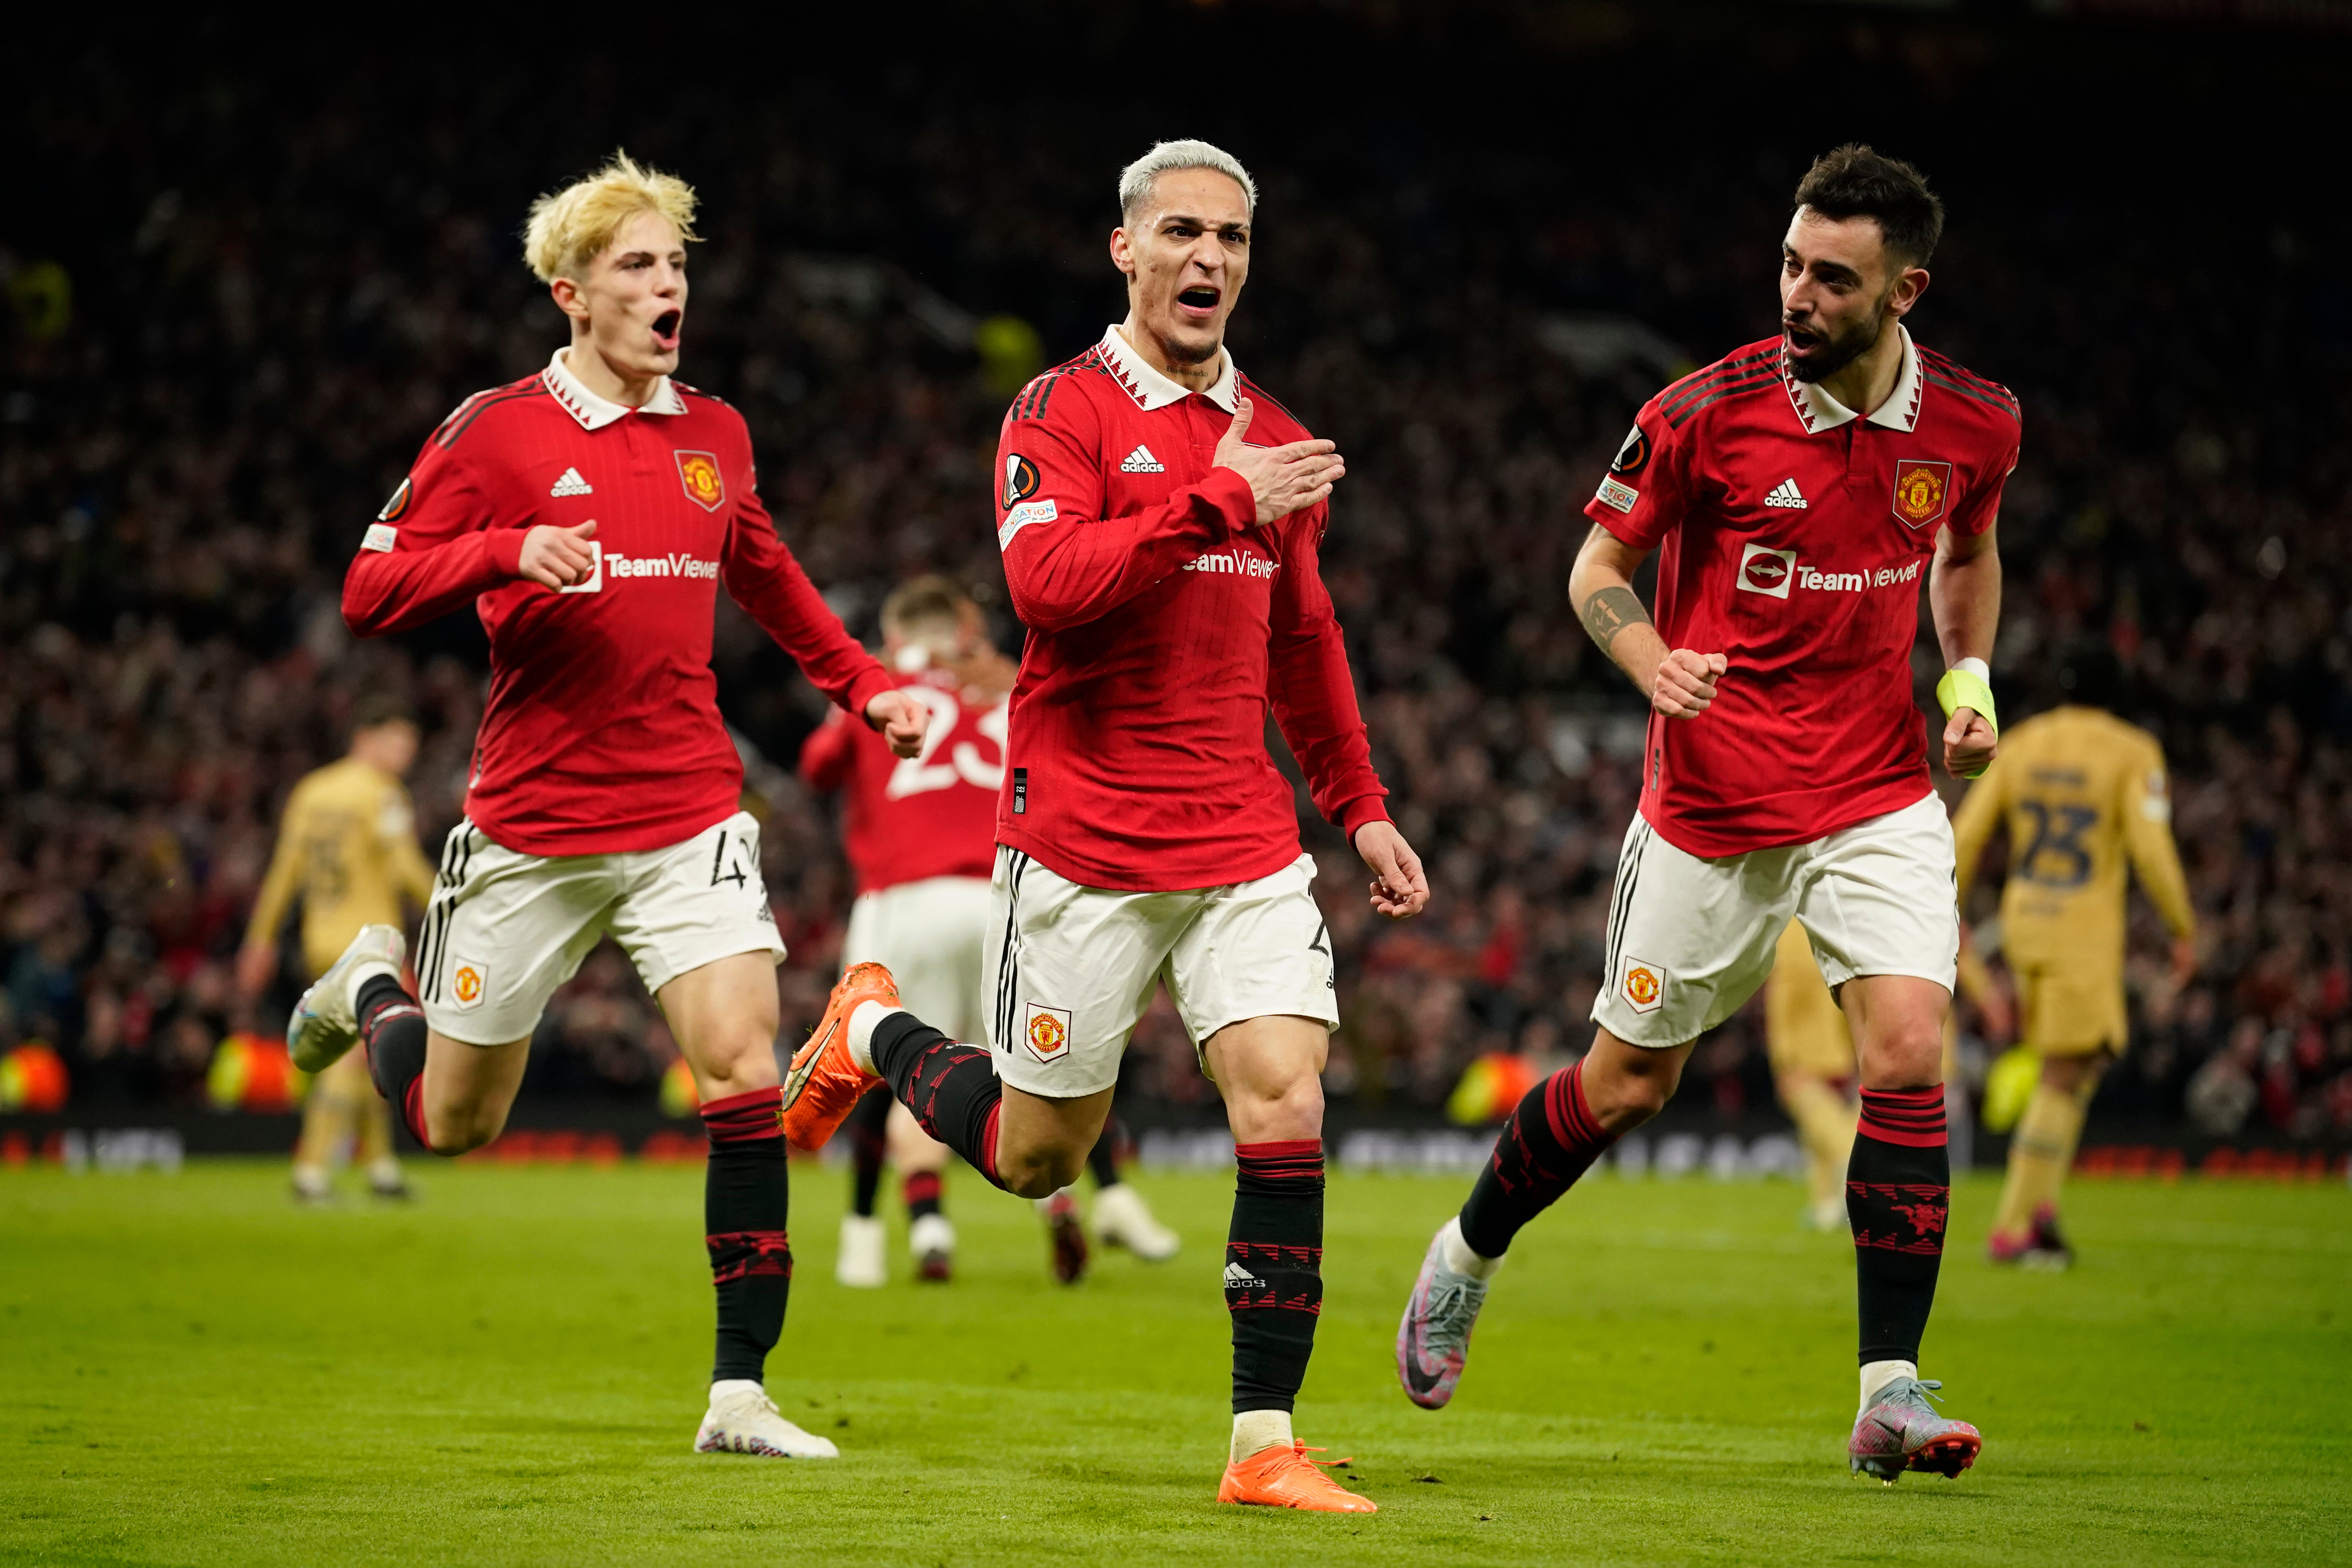 Manchester United defeated Barcelona in a thrilling Europa League tie on Thursday night